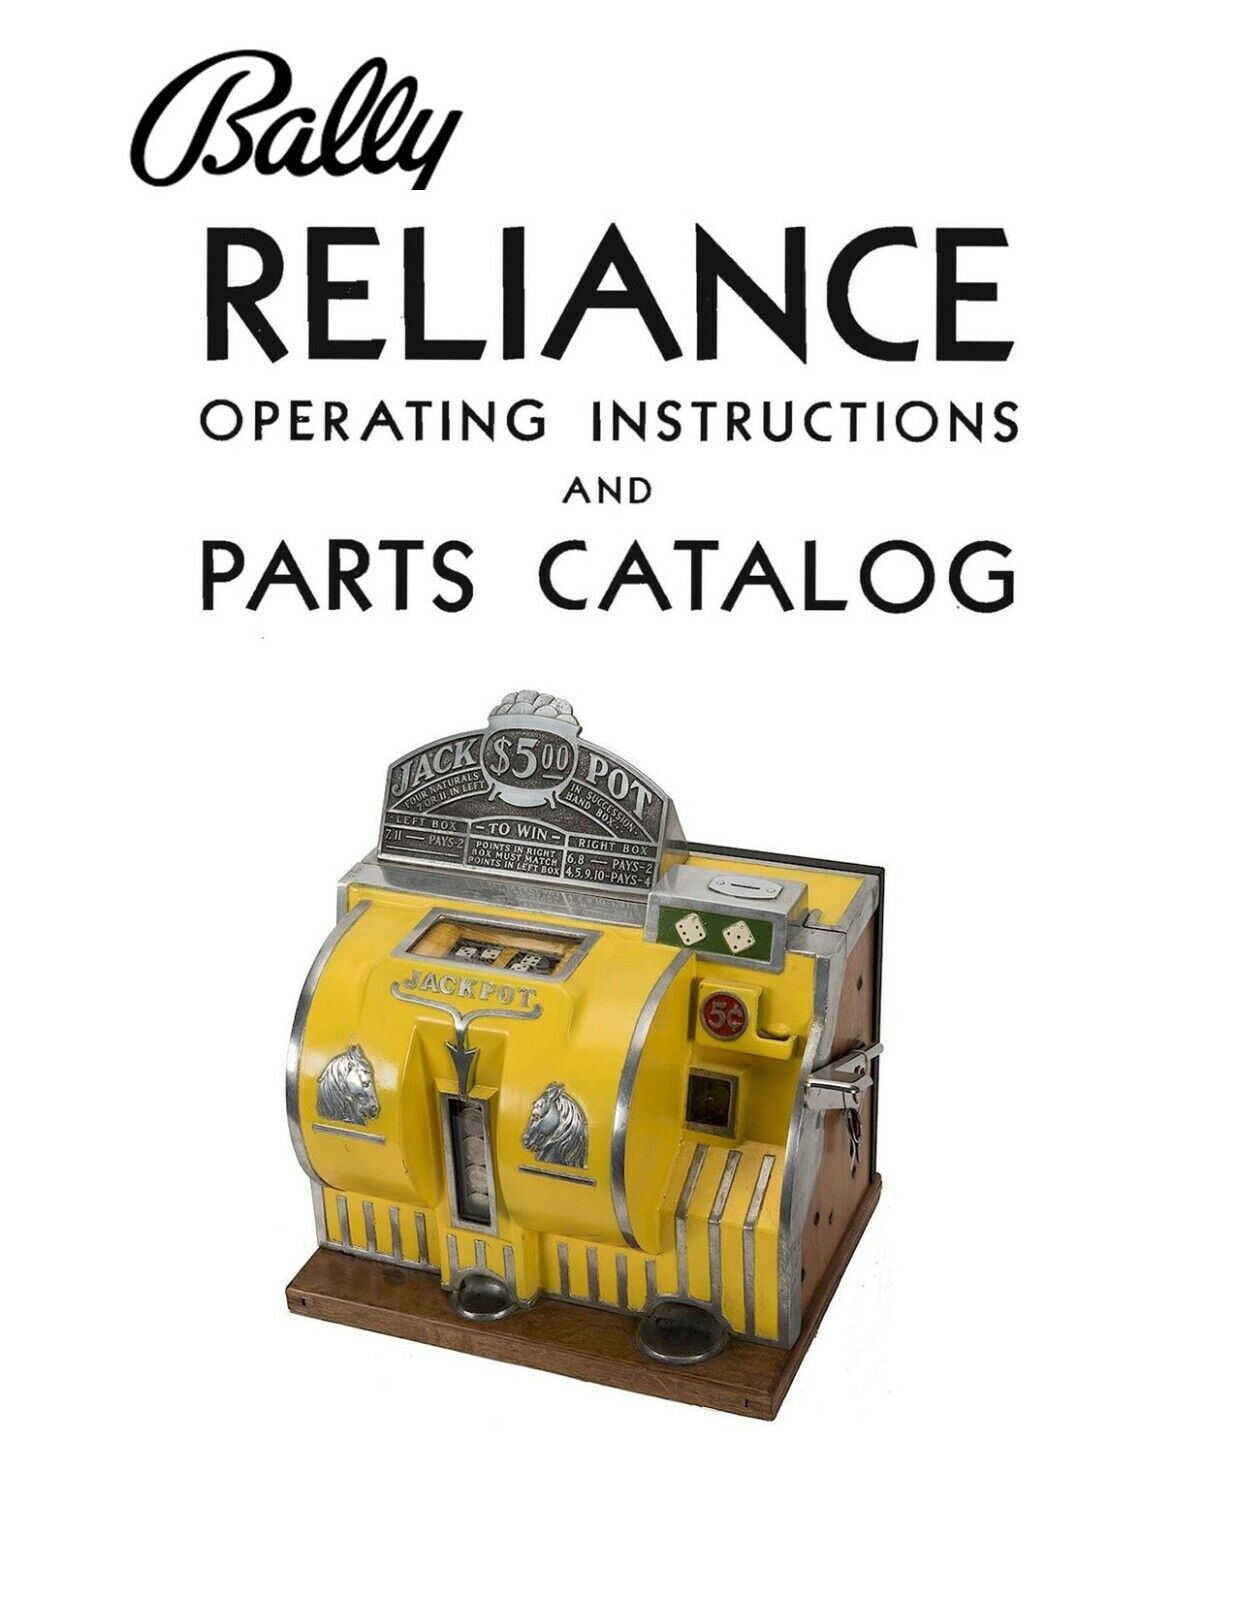 Bally\'s Reliance Dice Machine Operating Instructions & Parts Catalog 15 Pg.1936